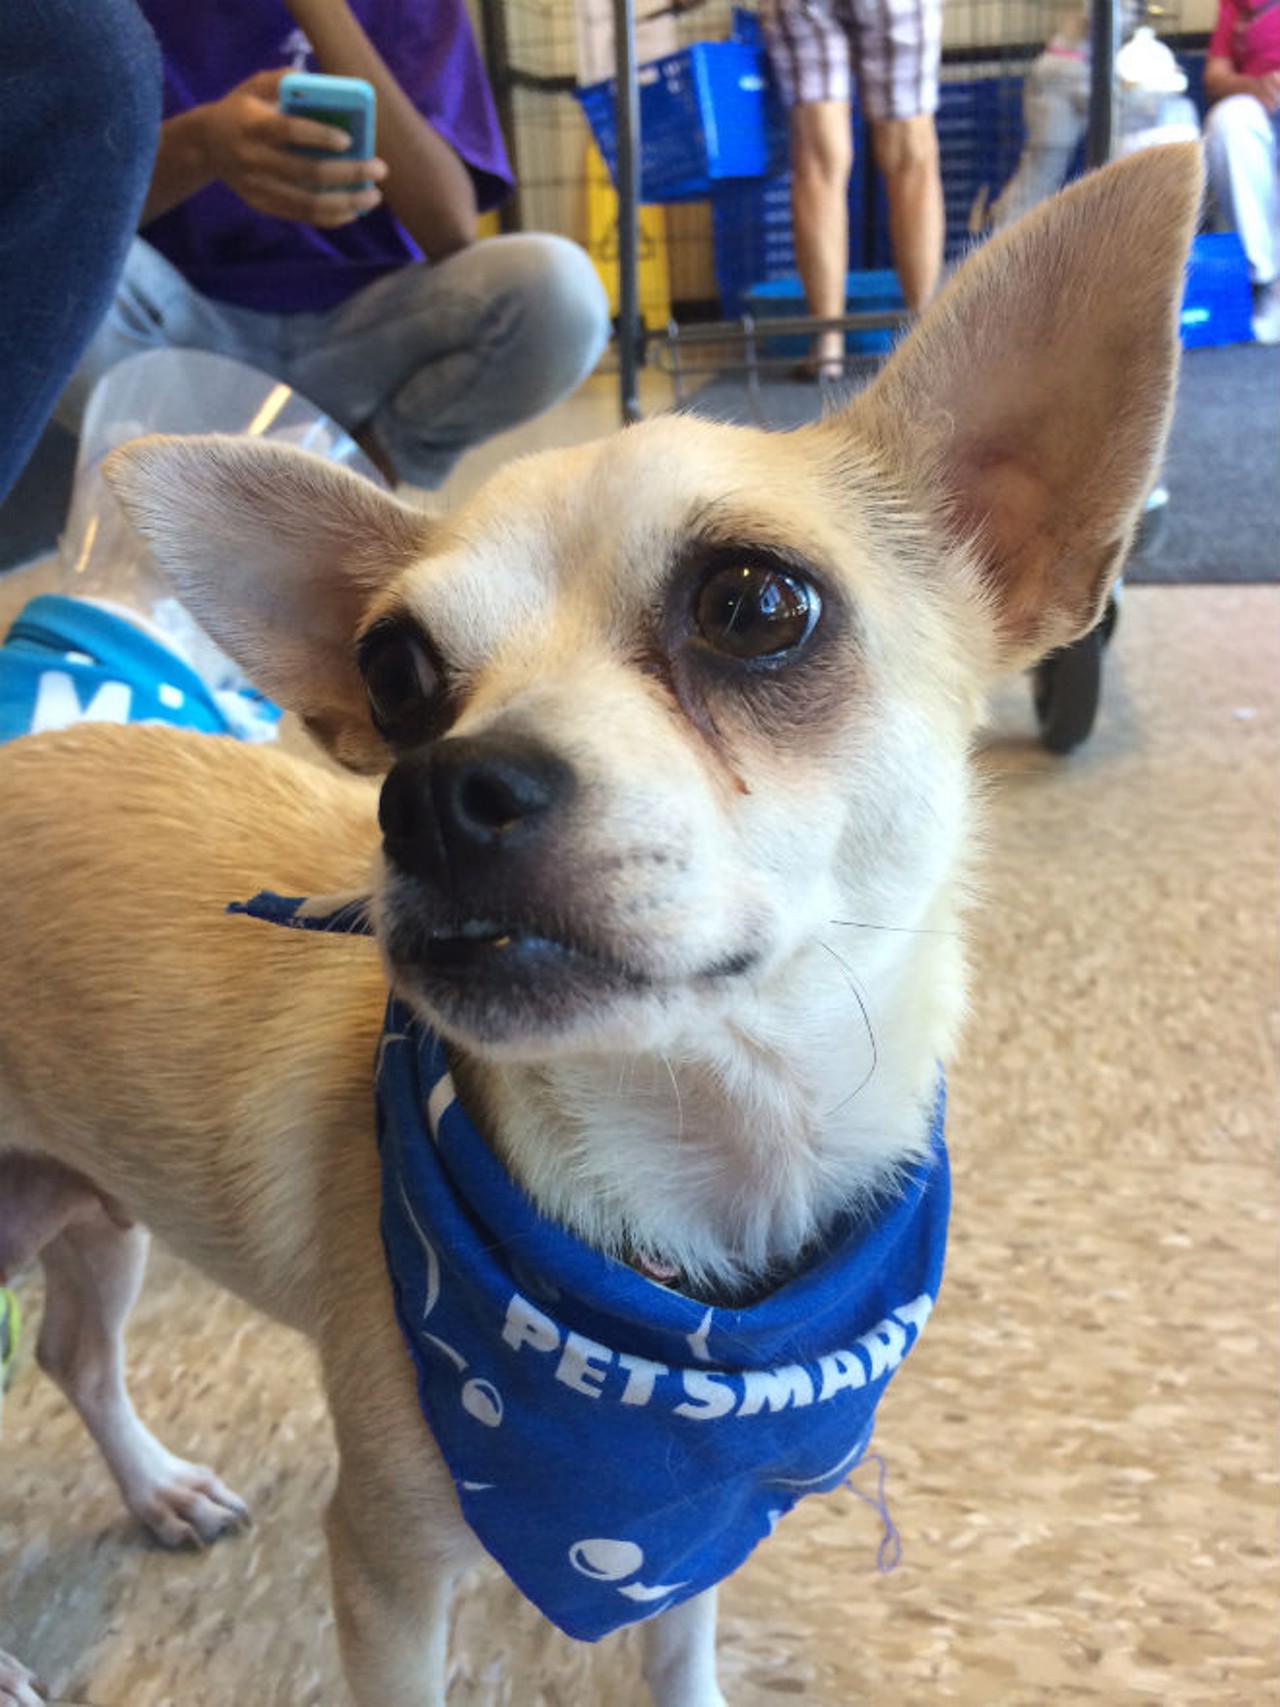 This cute little dog was up for adoption at an OCAS adoption event at Petsmart on Sunday 29 certified pre-owned pups looking for homes at Orange County Animal Services